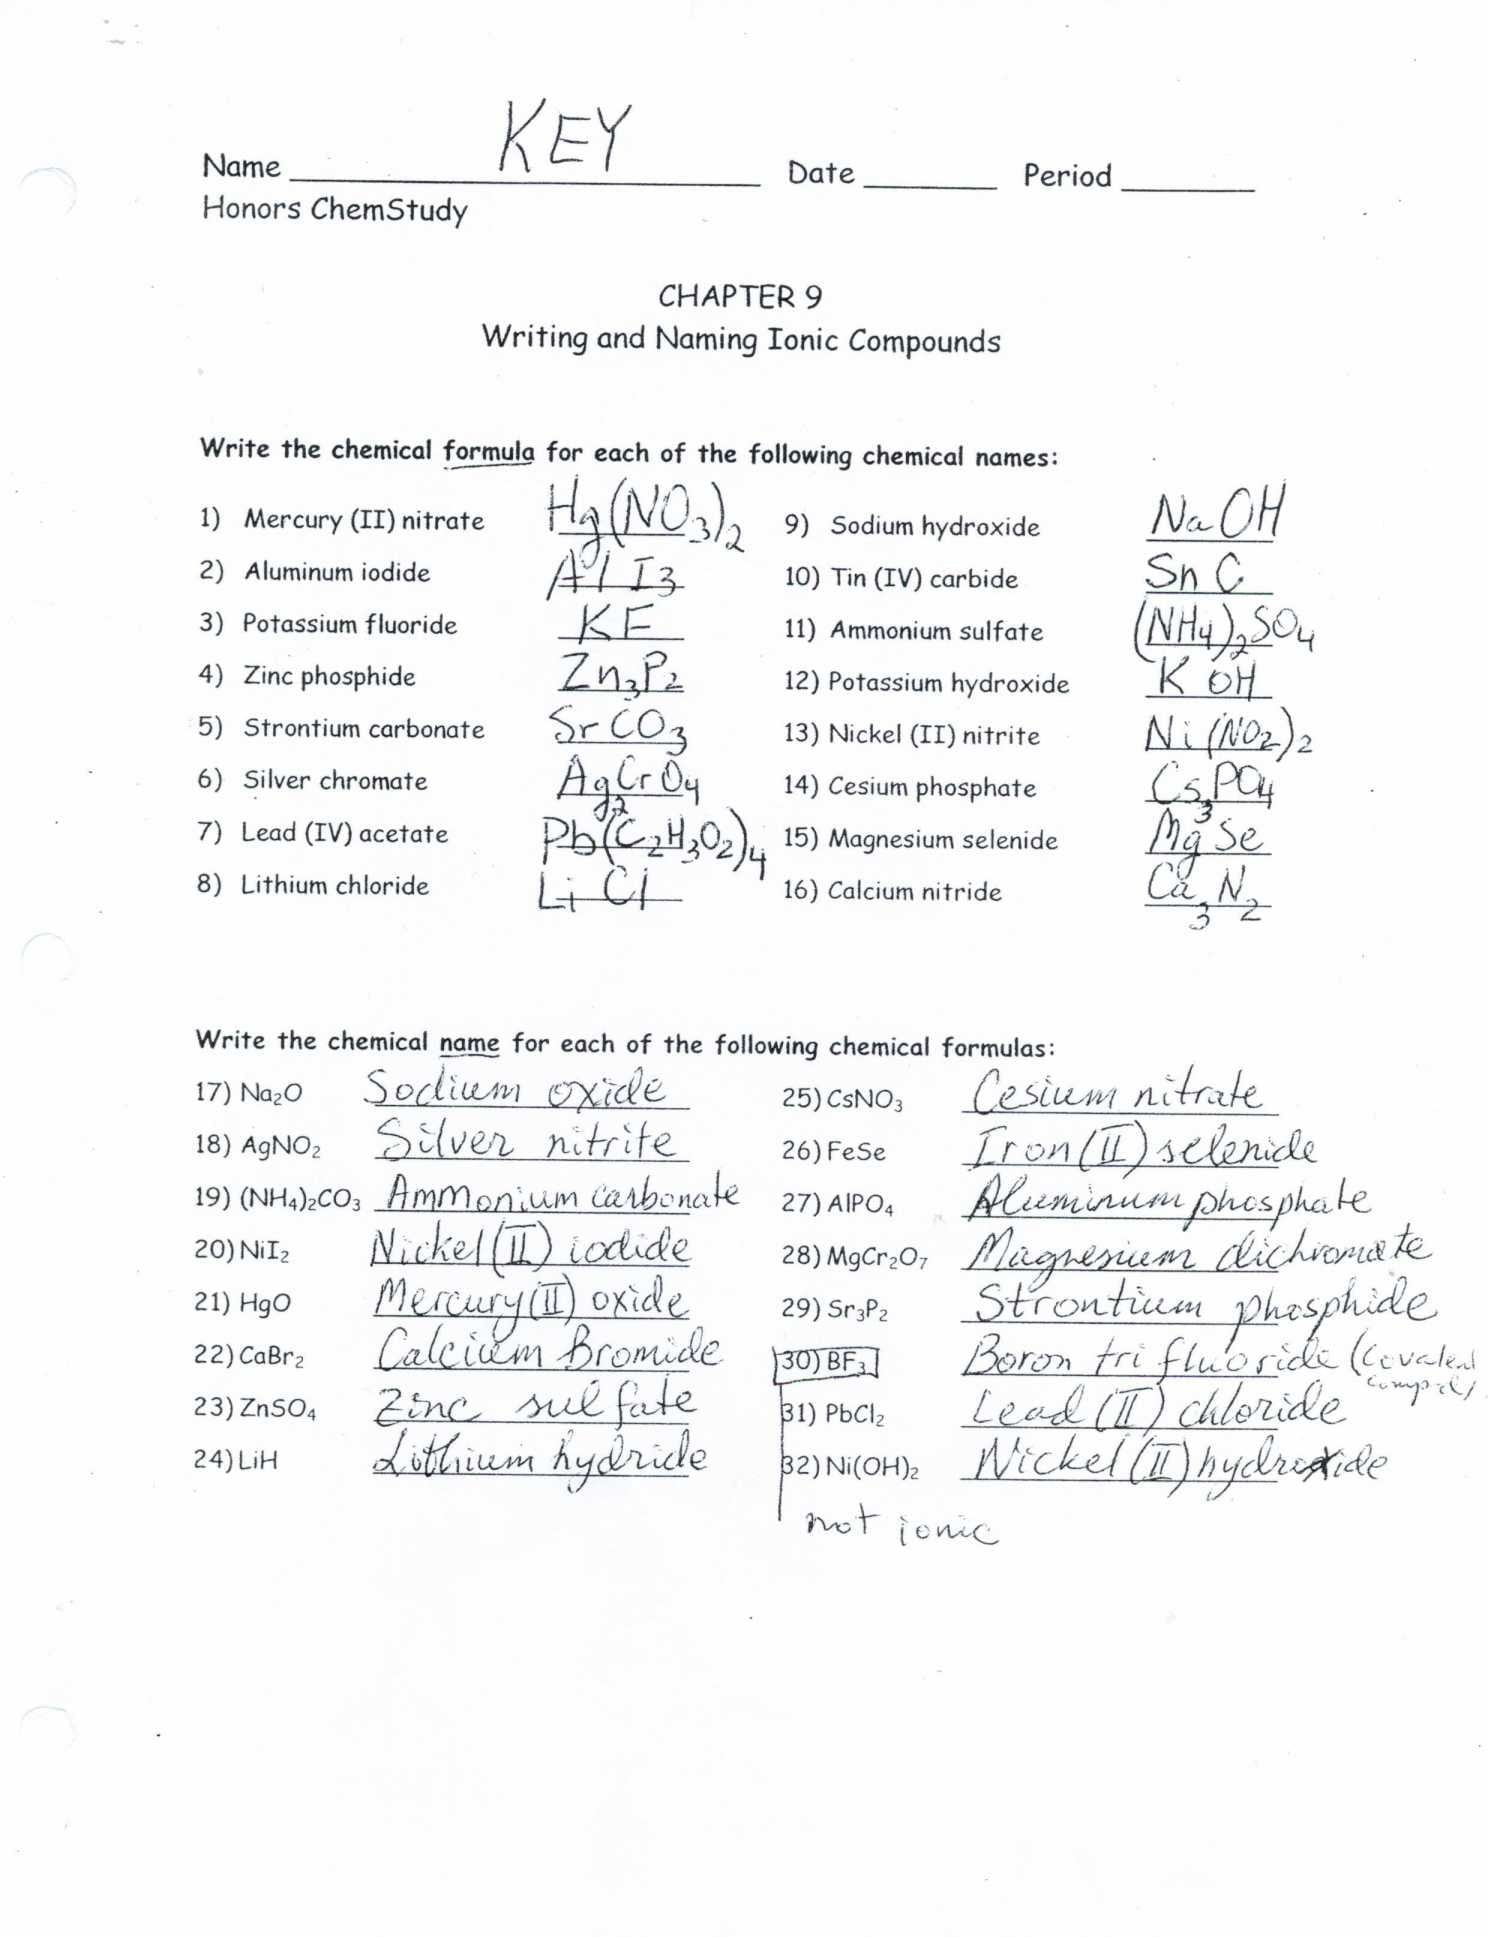 Ternary Ionic Compounds Worksheet  Soccerphysicsonline With Ternary Ionic Compounds Worksheet